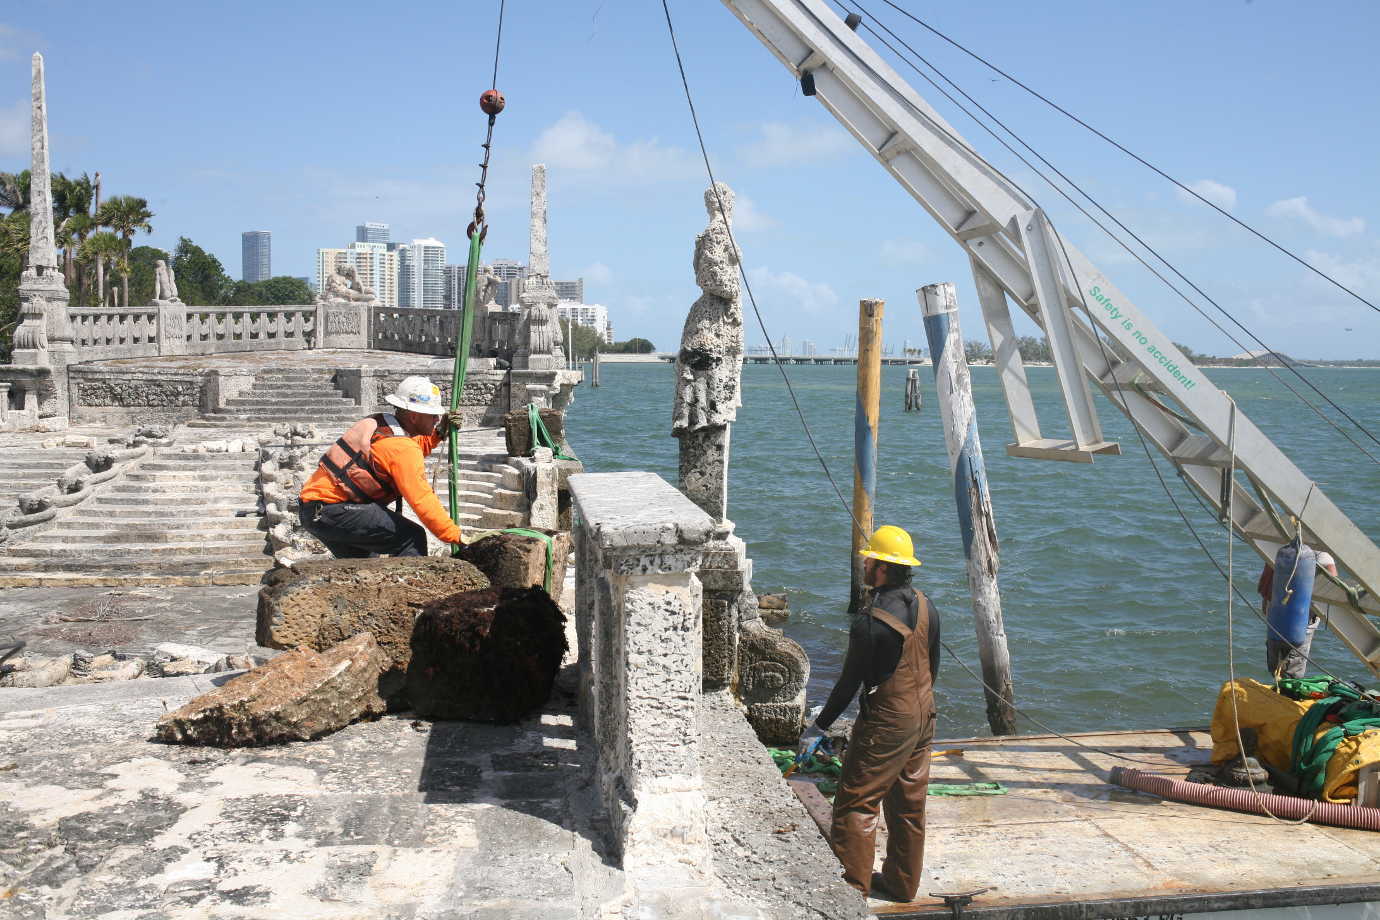 A work crew recovers elements of Vizcaya's stone barge, which were submerged and damaged during Hurricane Irma in 2017. Image courtesy of Vizcaya.